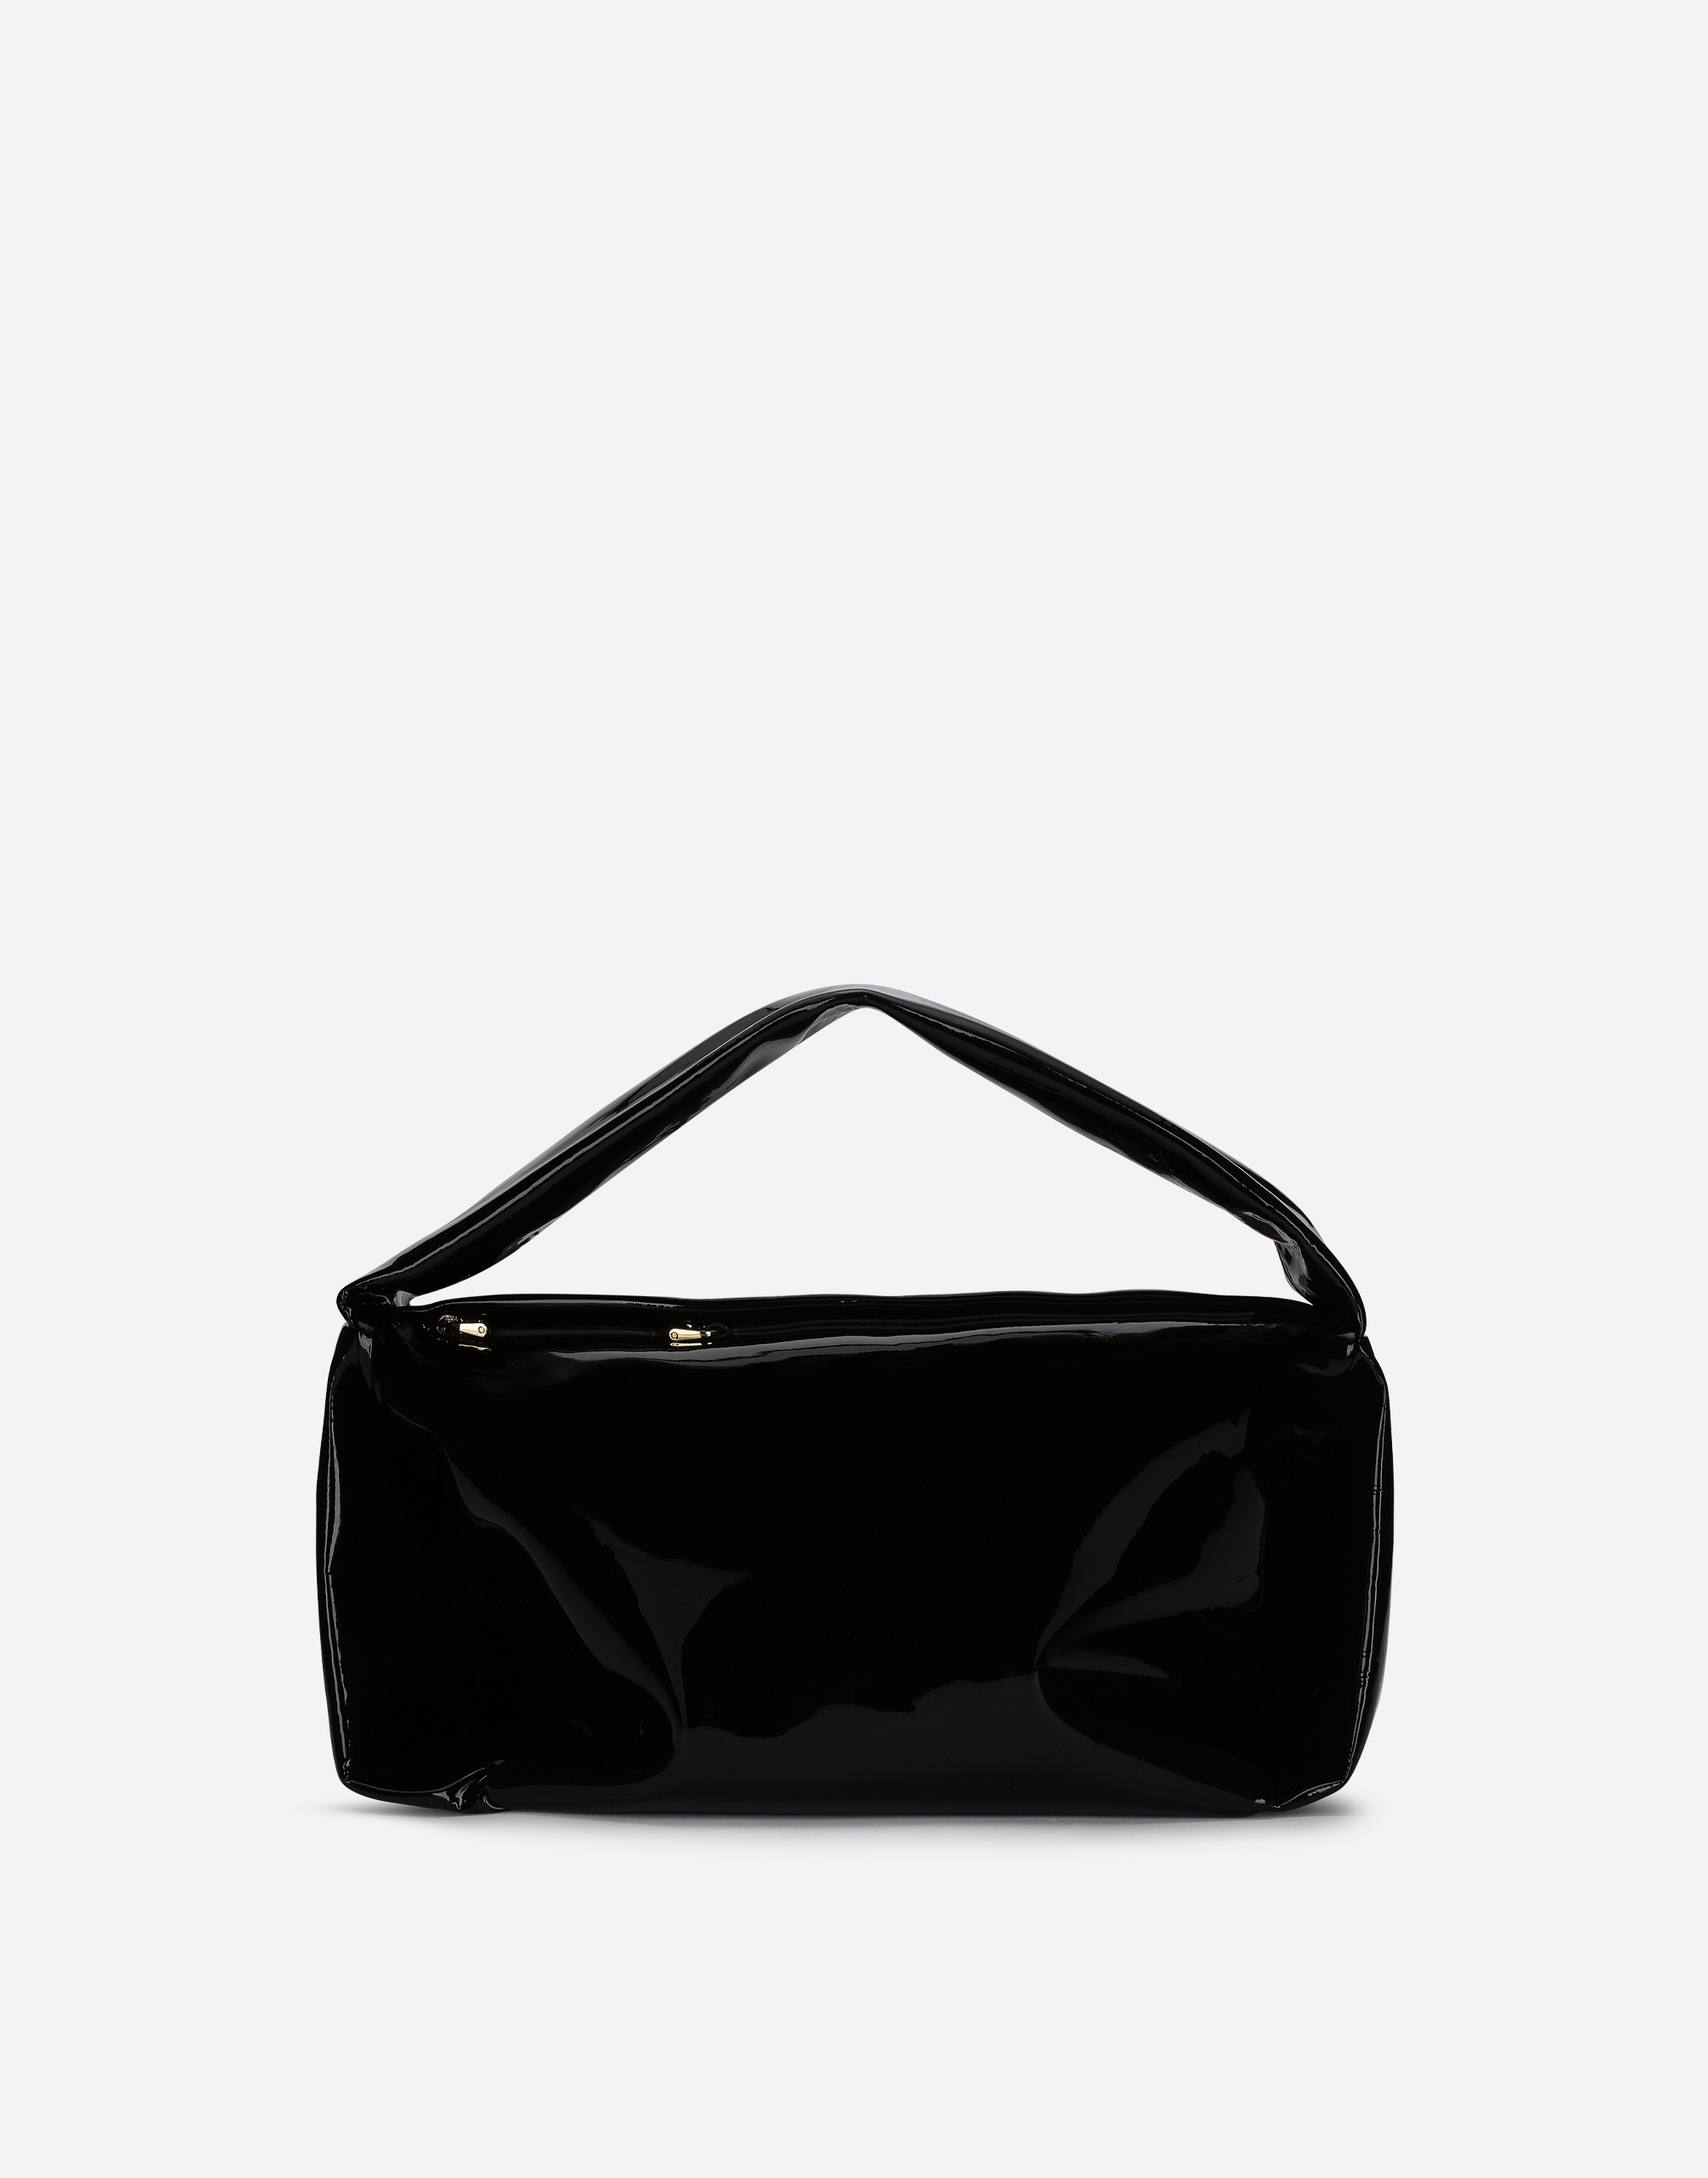 Patent leather Soft bag with branded tag in Black